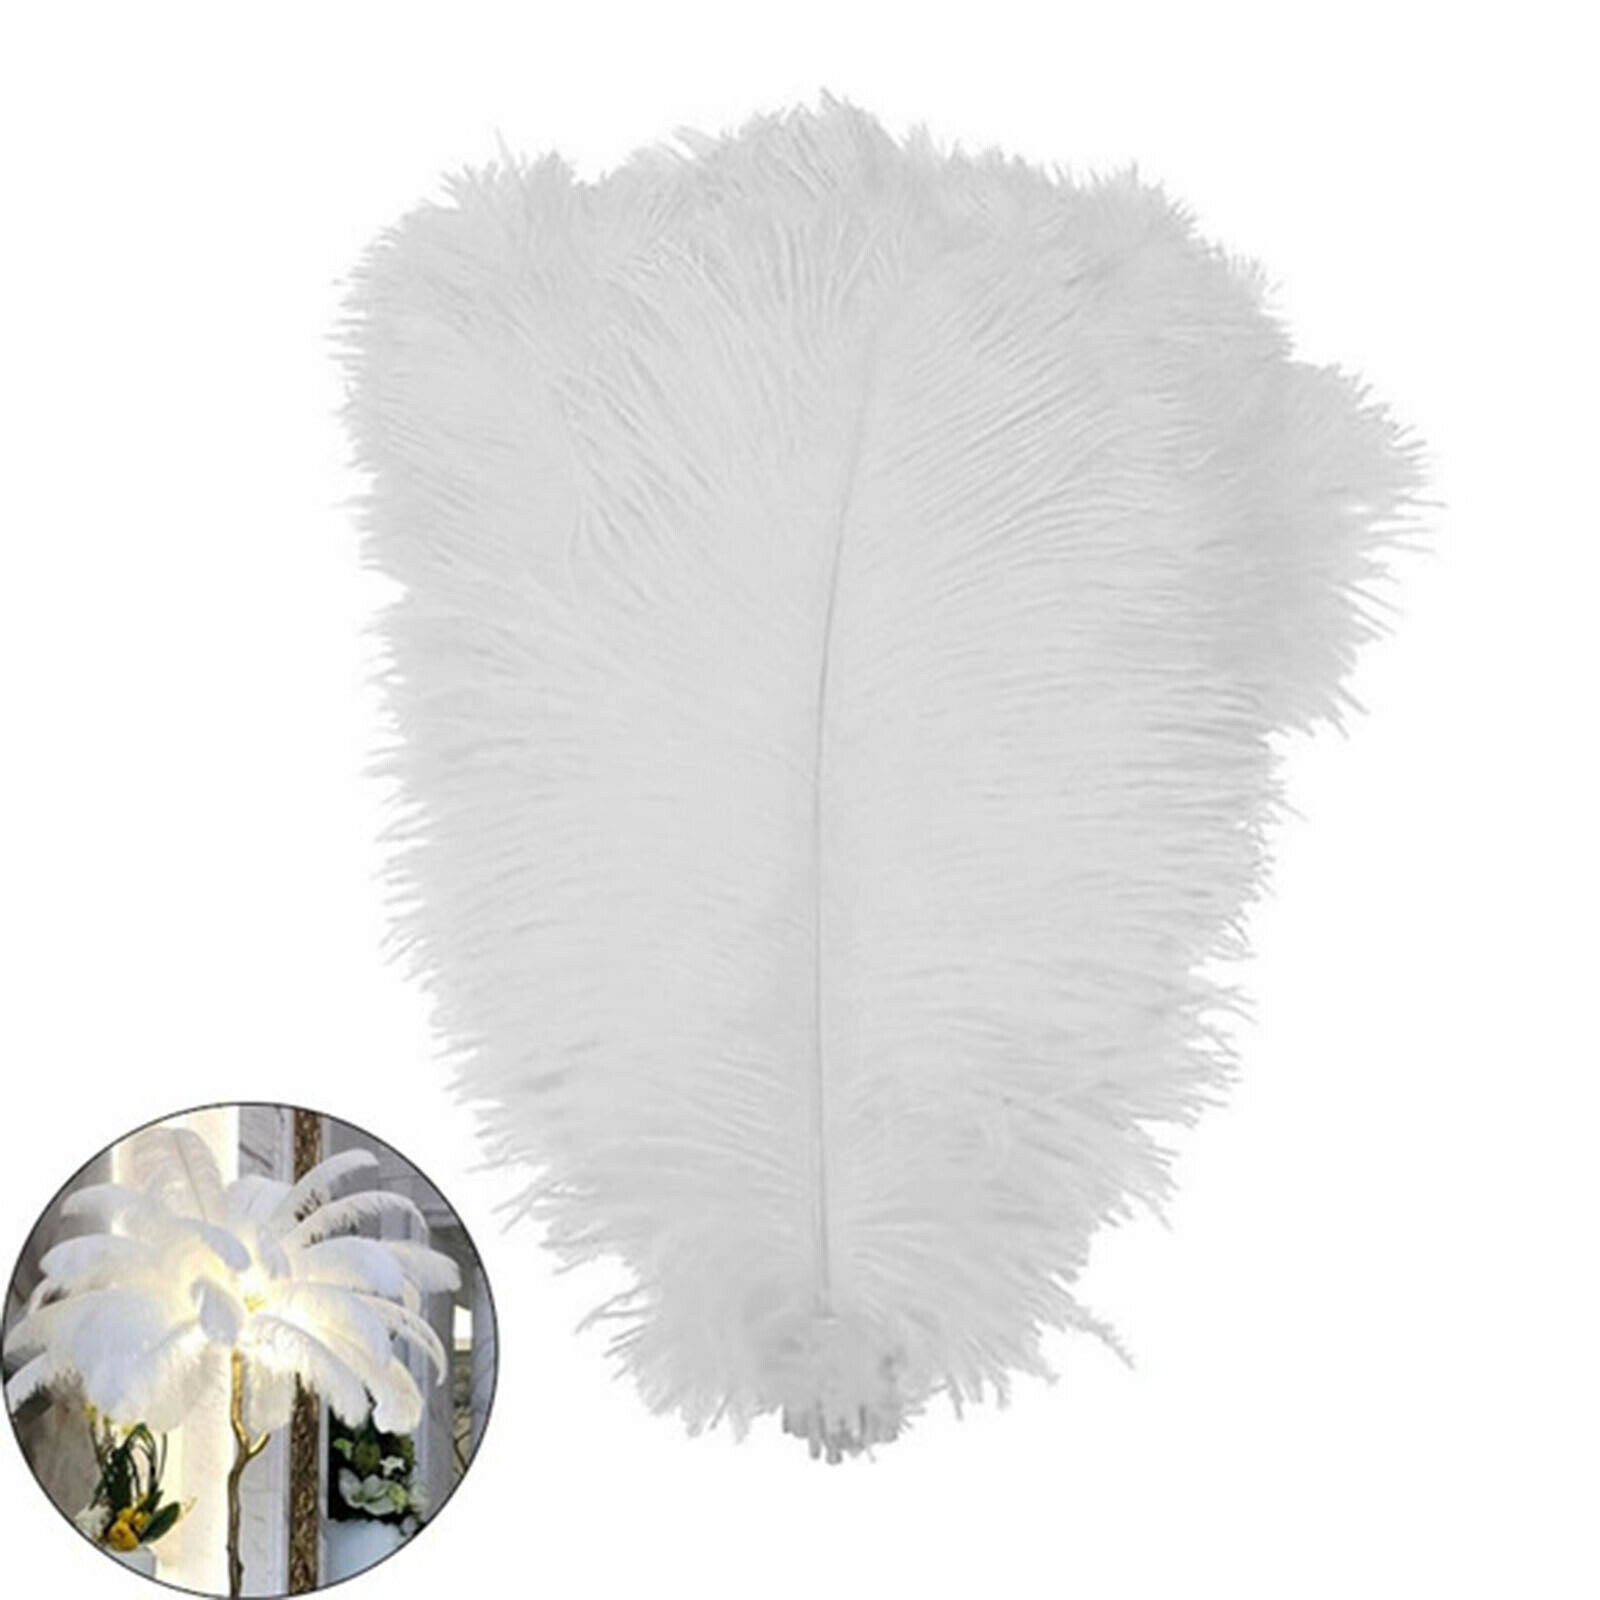 10x Ostrich Feathers 9.8-11.8 inch Decorations Home White #Natural for Party